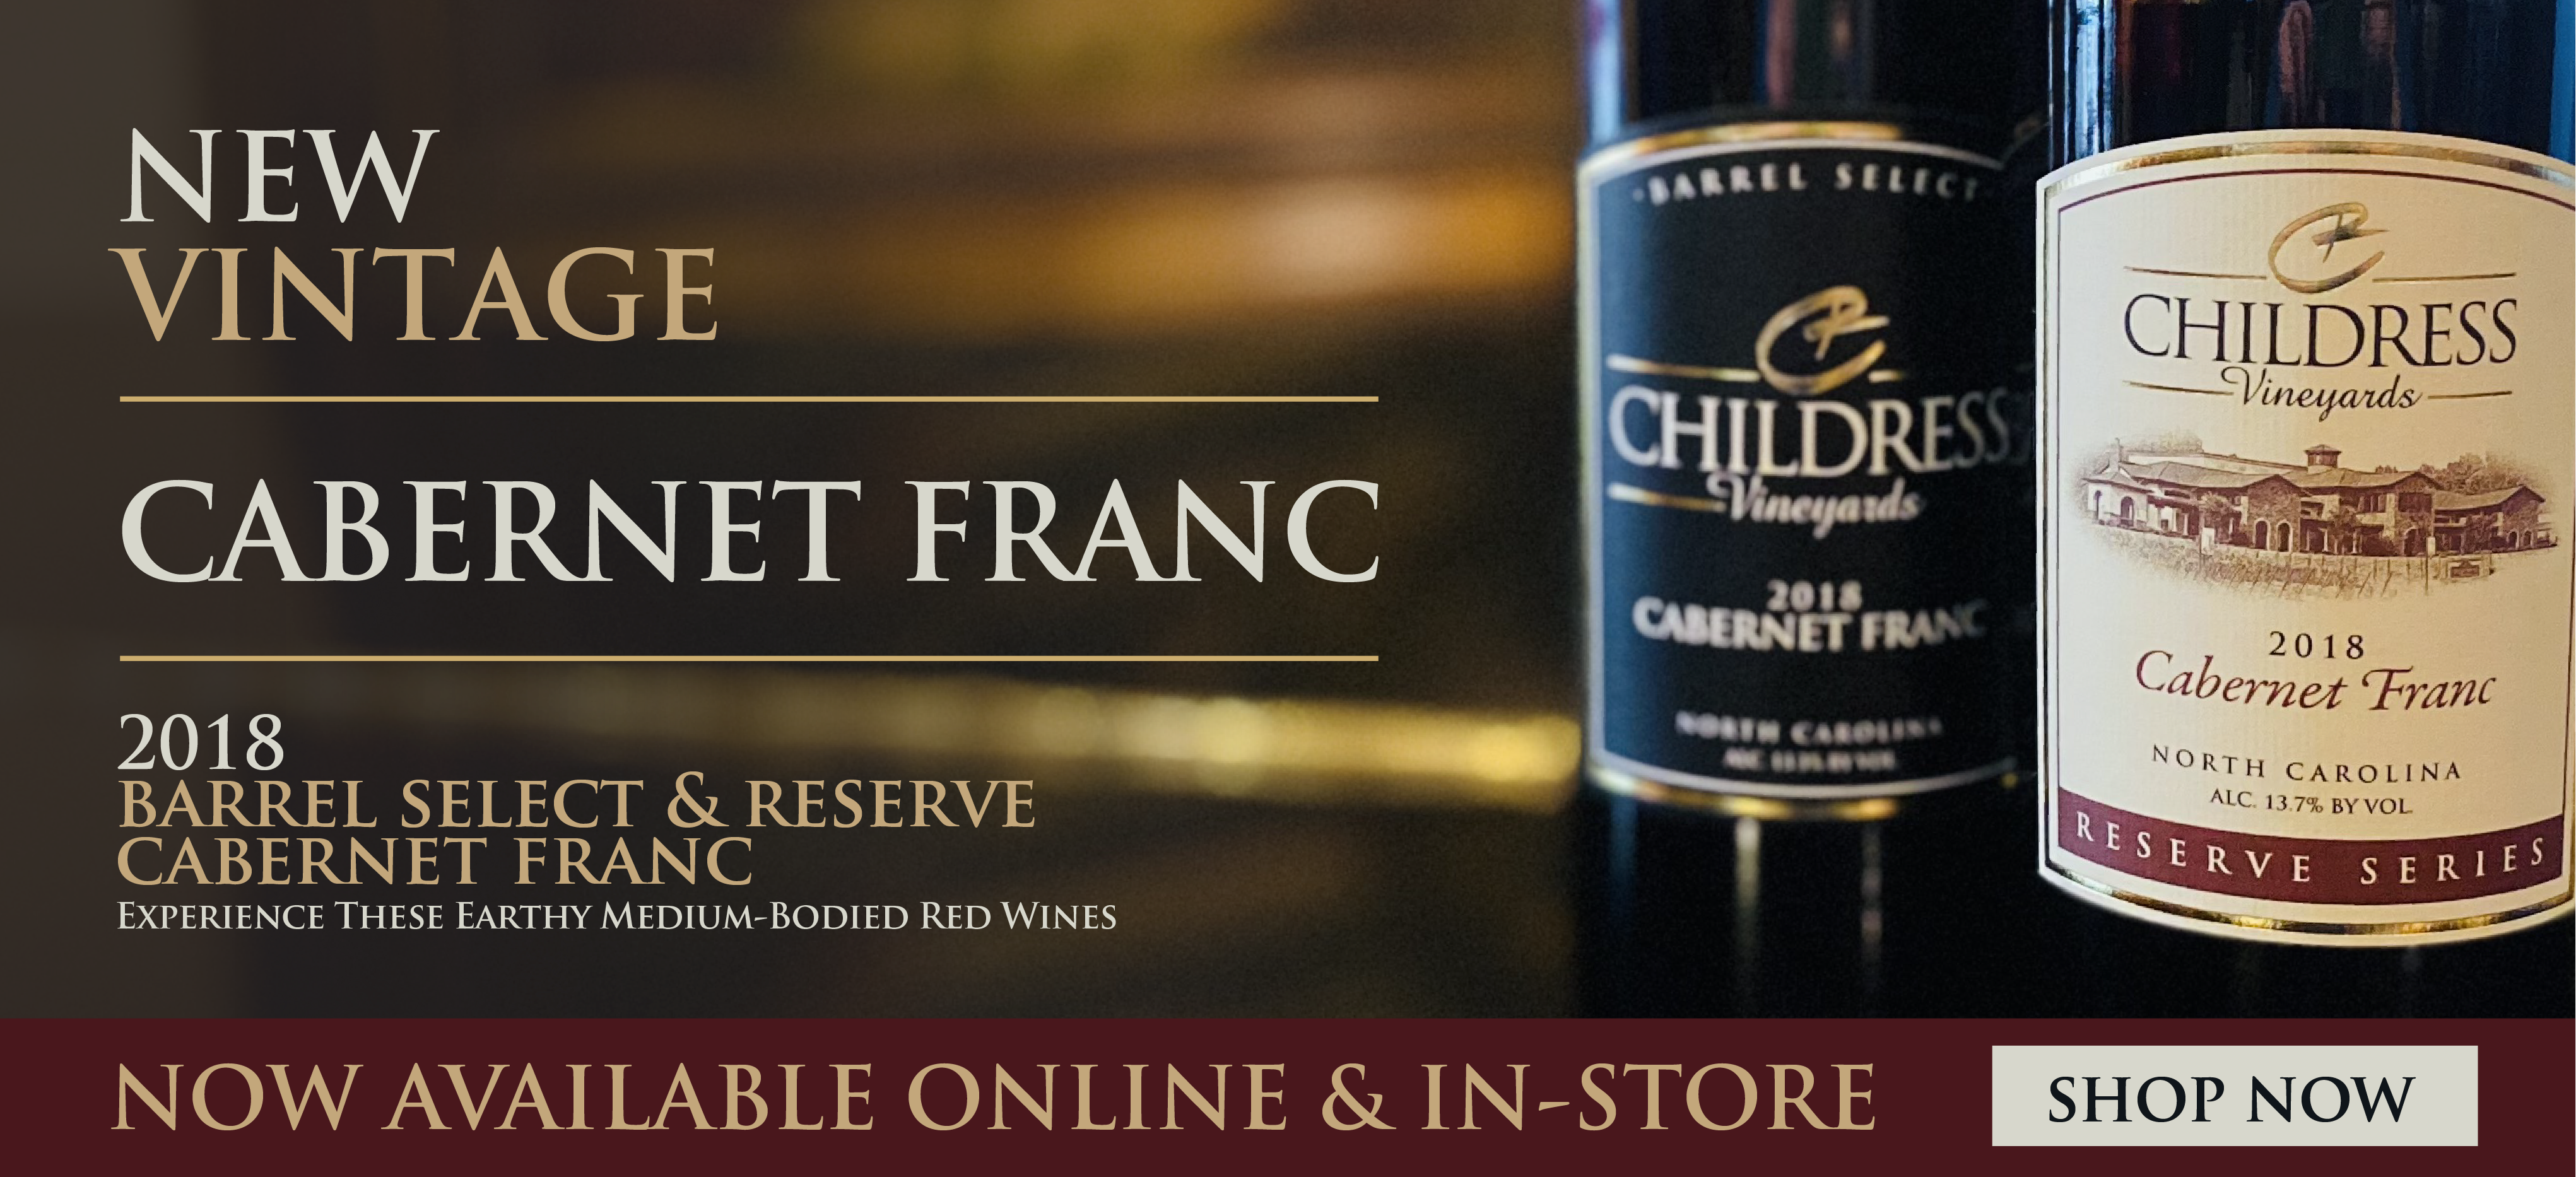 Childress Vineyards and Winery New Vintage Cabernet Franc Red Wine